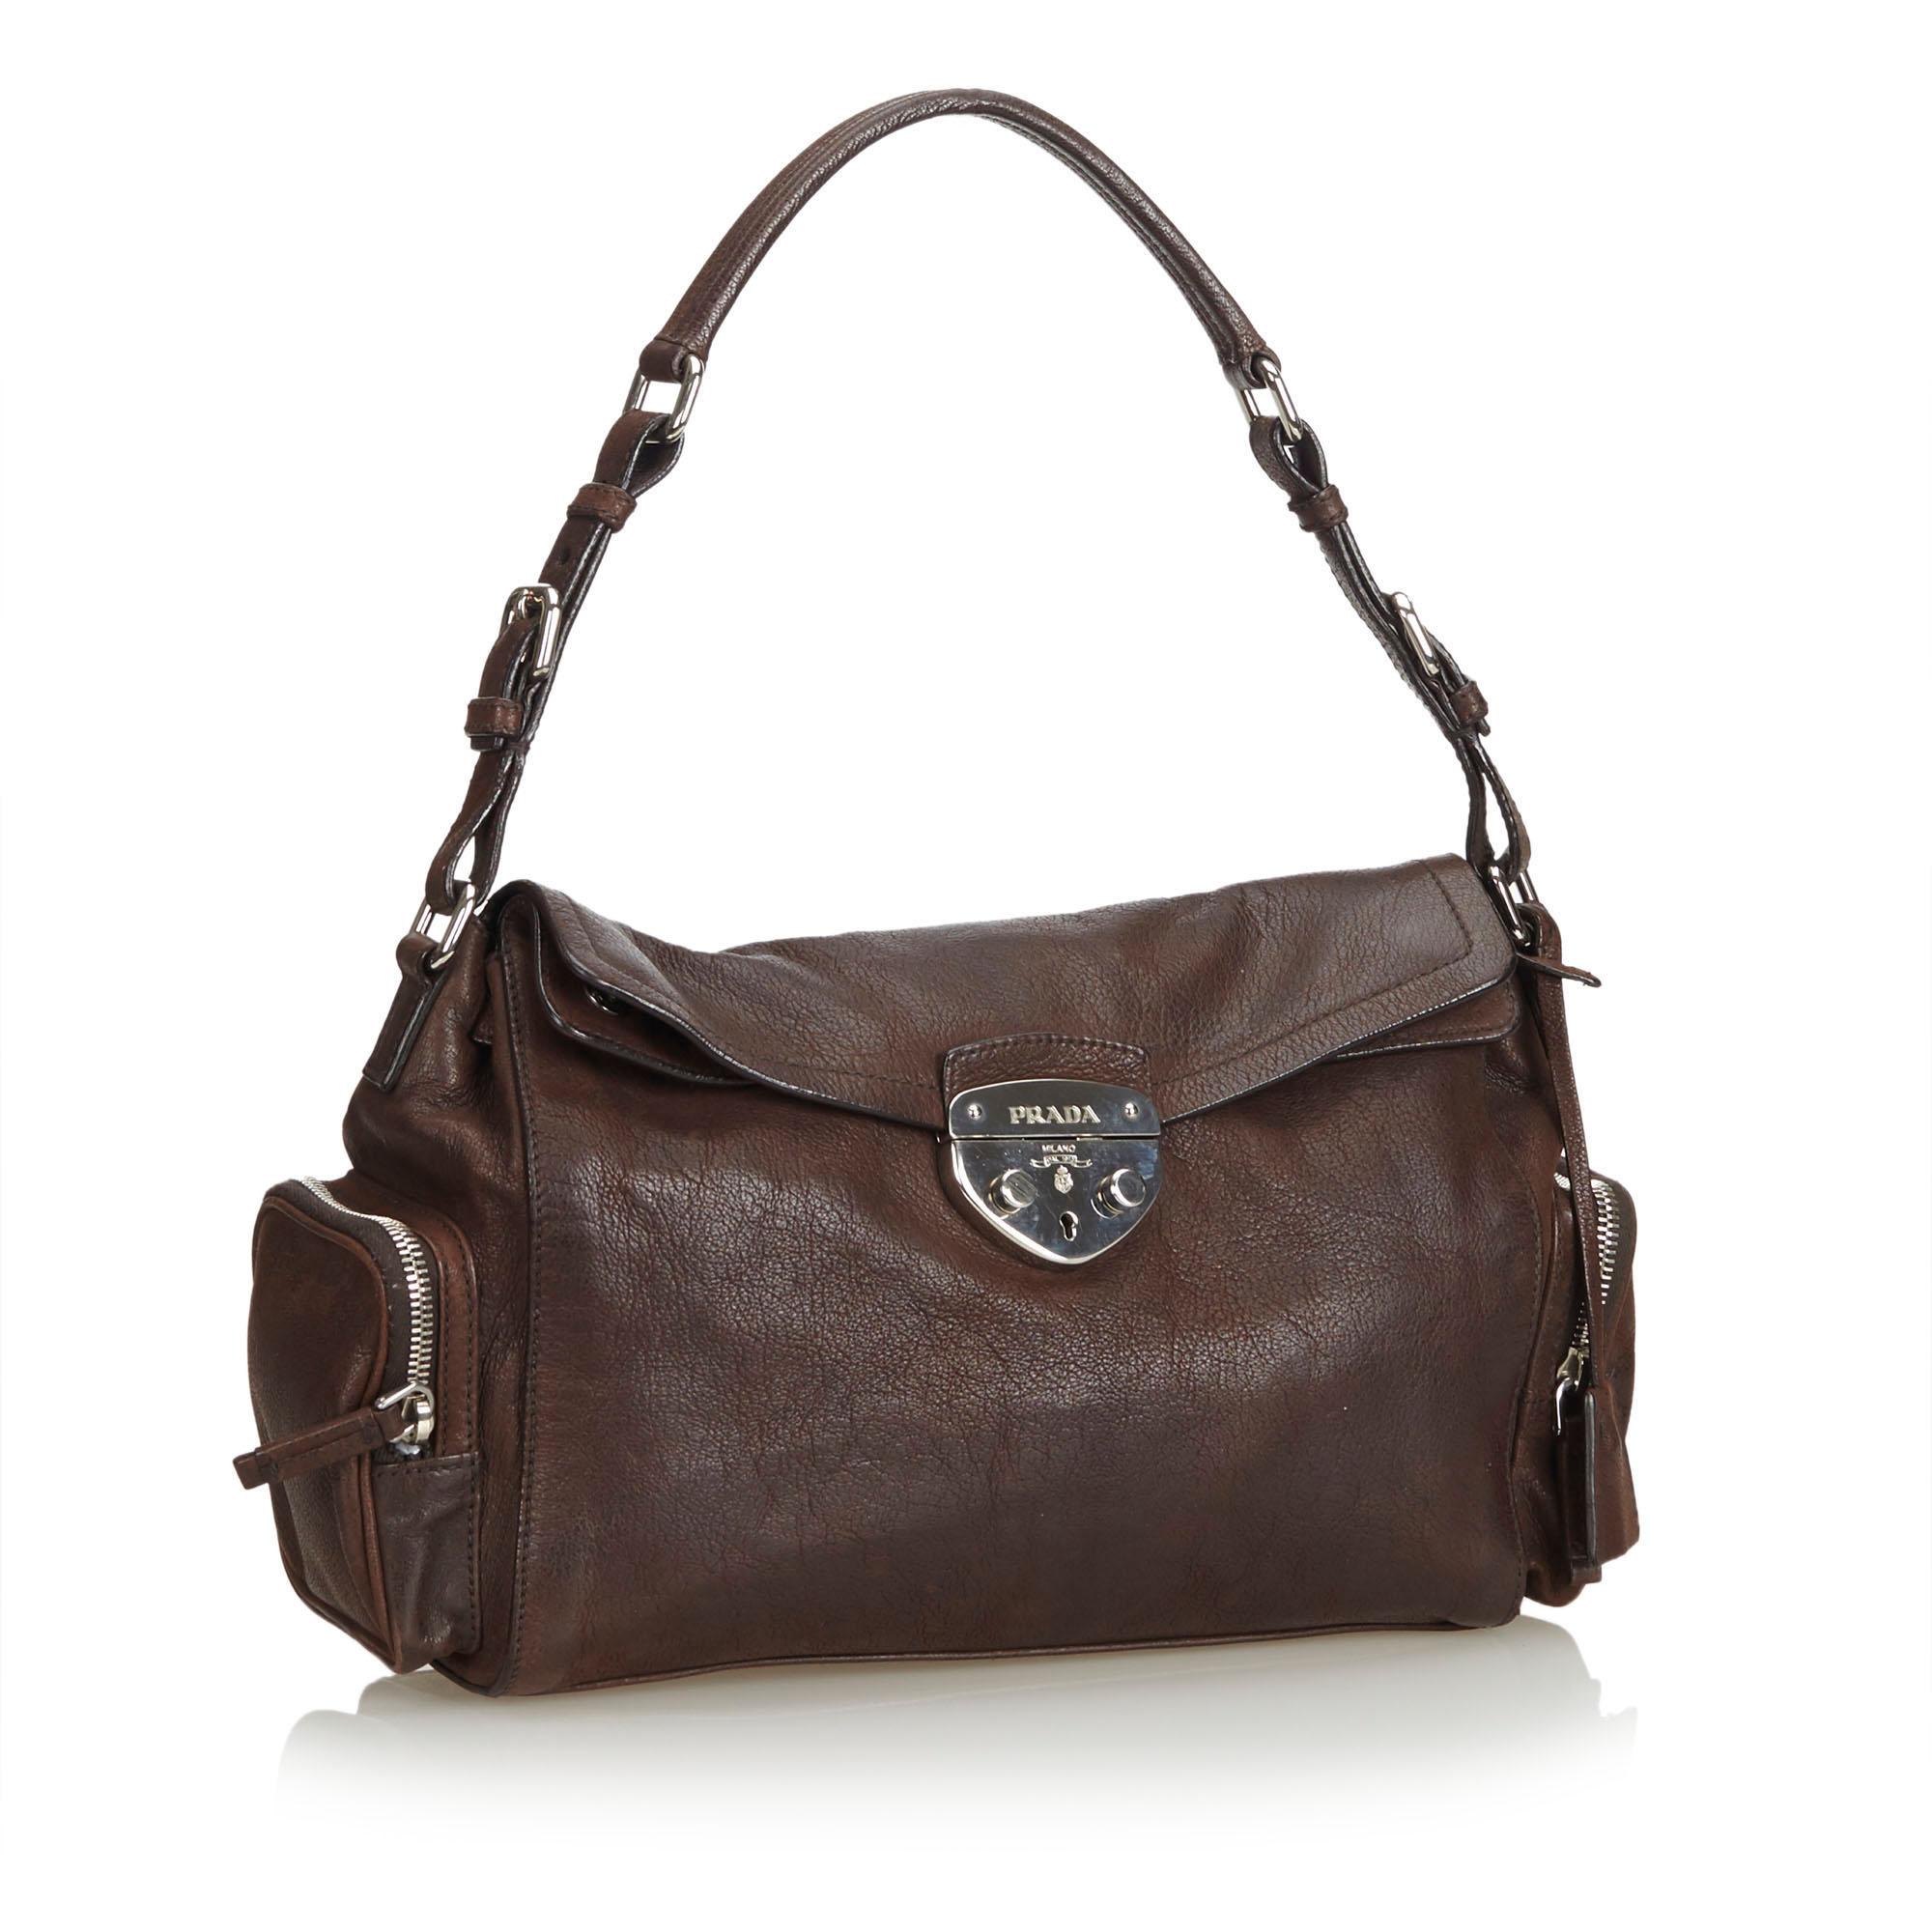 This shoulder bag features a leather body, exterior side zip pockets, exterior back zip pocket, front flap with push lock closure, flat leather strap with belt details, and an interior zip pocket. It carries as B condition rating.

Inclusions: 
Dust